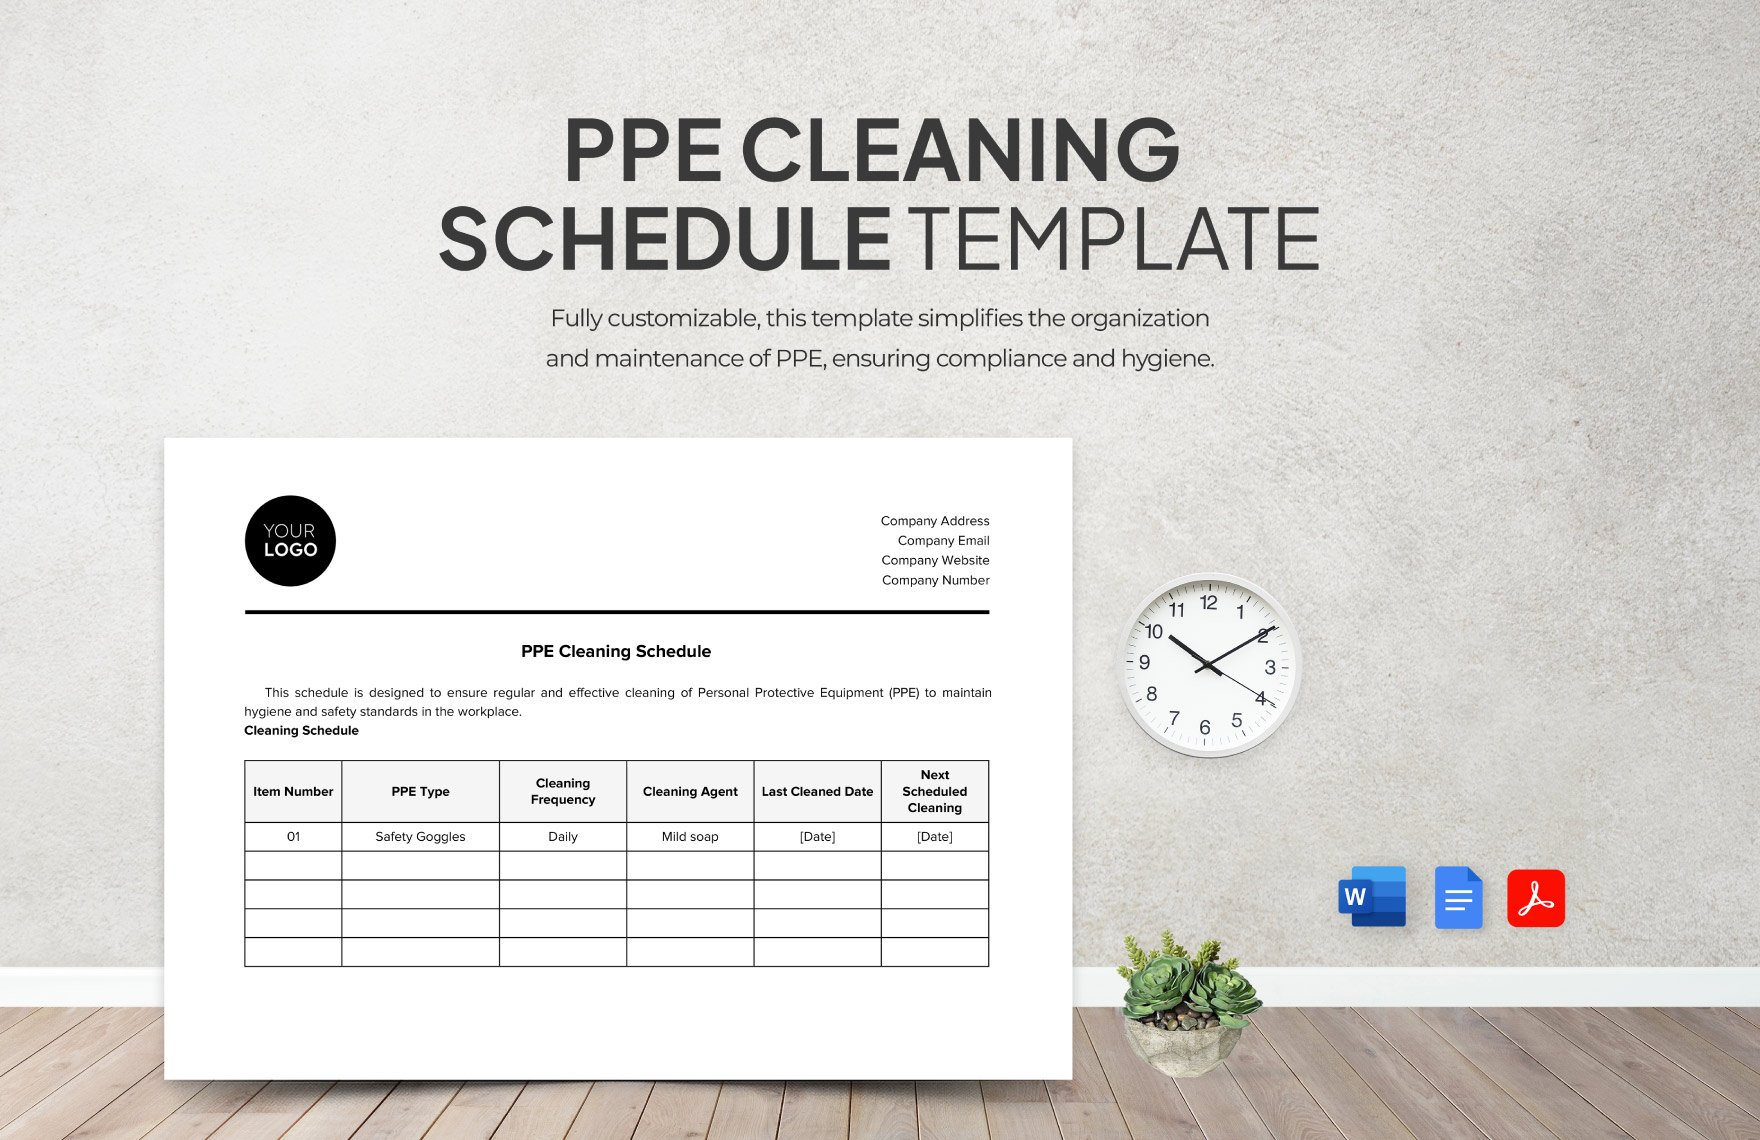 PPE Cleaning Schedule Template